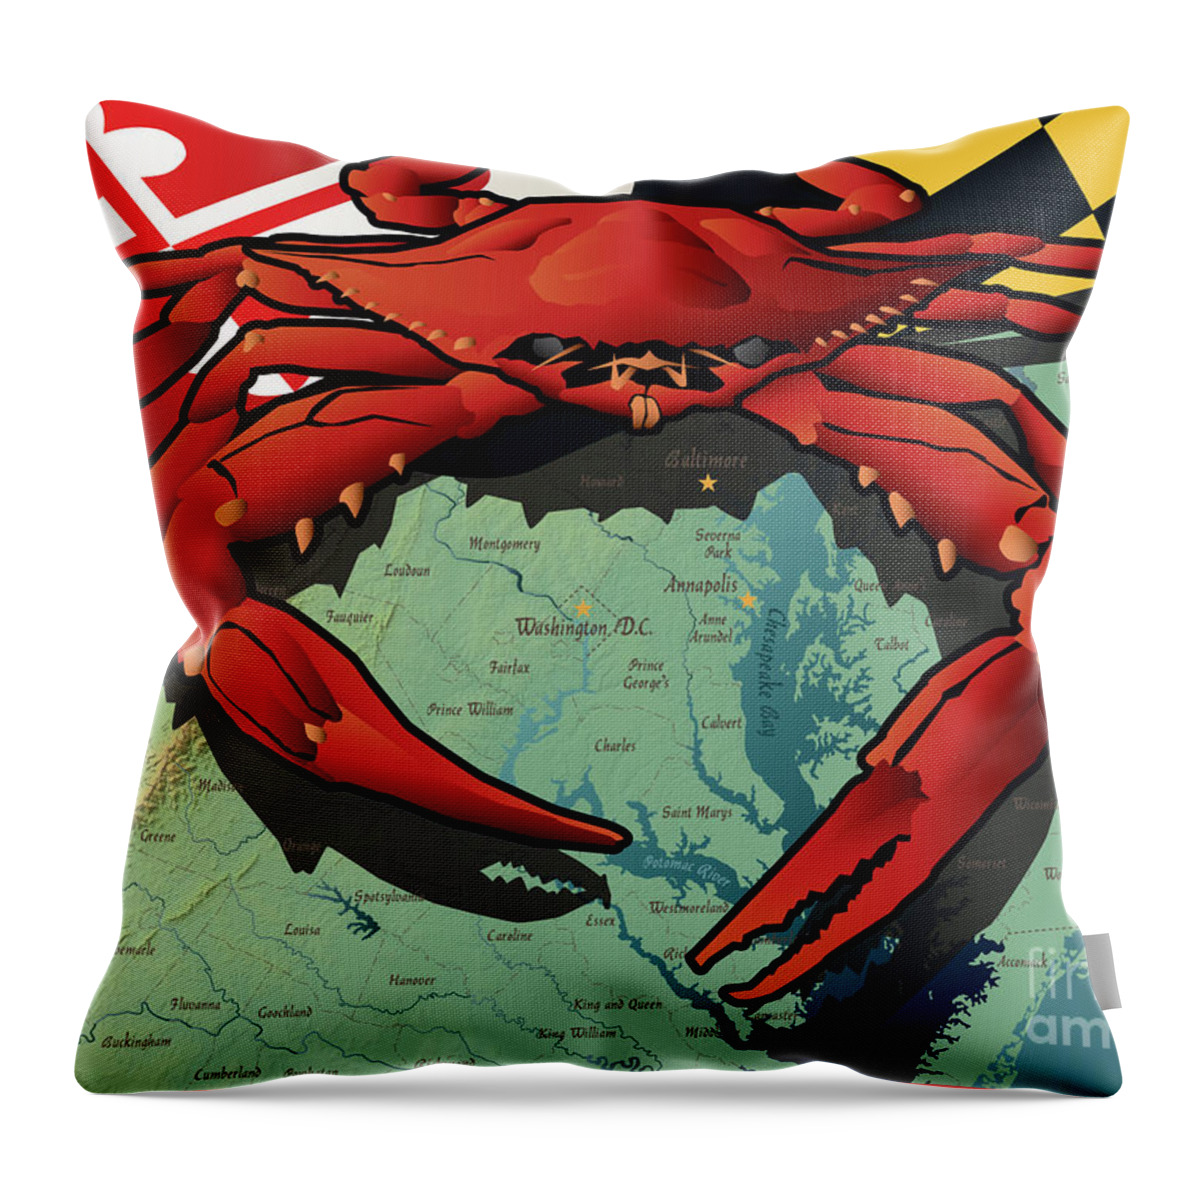 Crab Throw Pillow featuring the digital art Maryland Red Crab by Joe Barsin